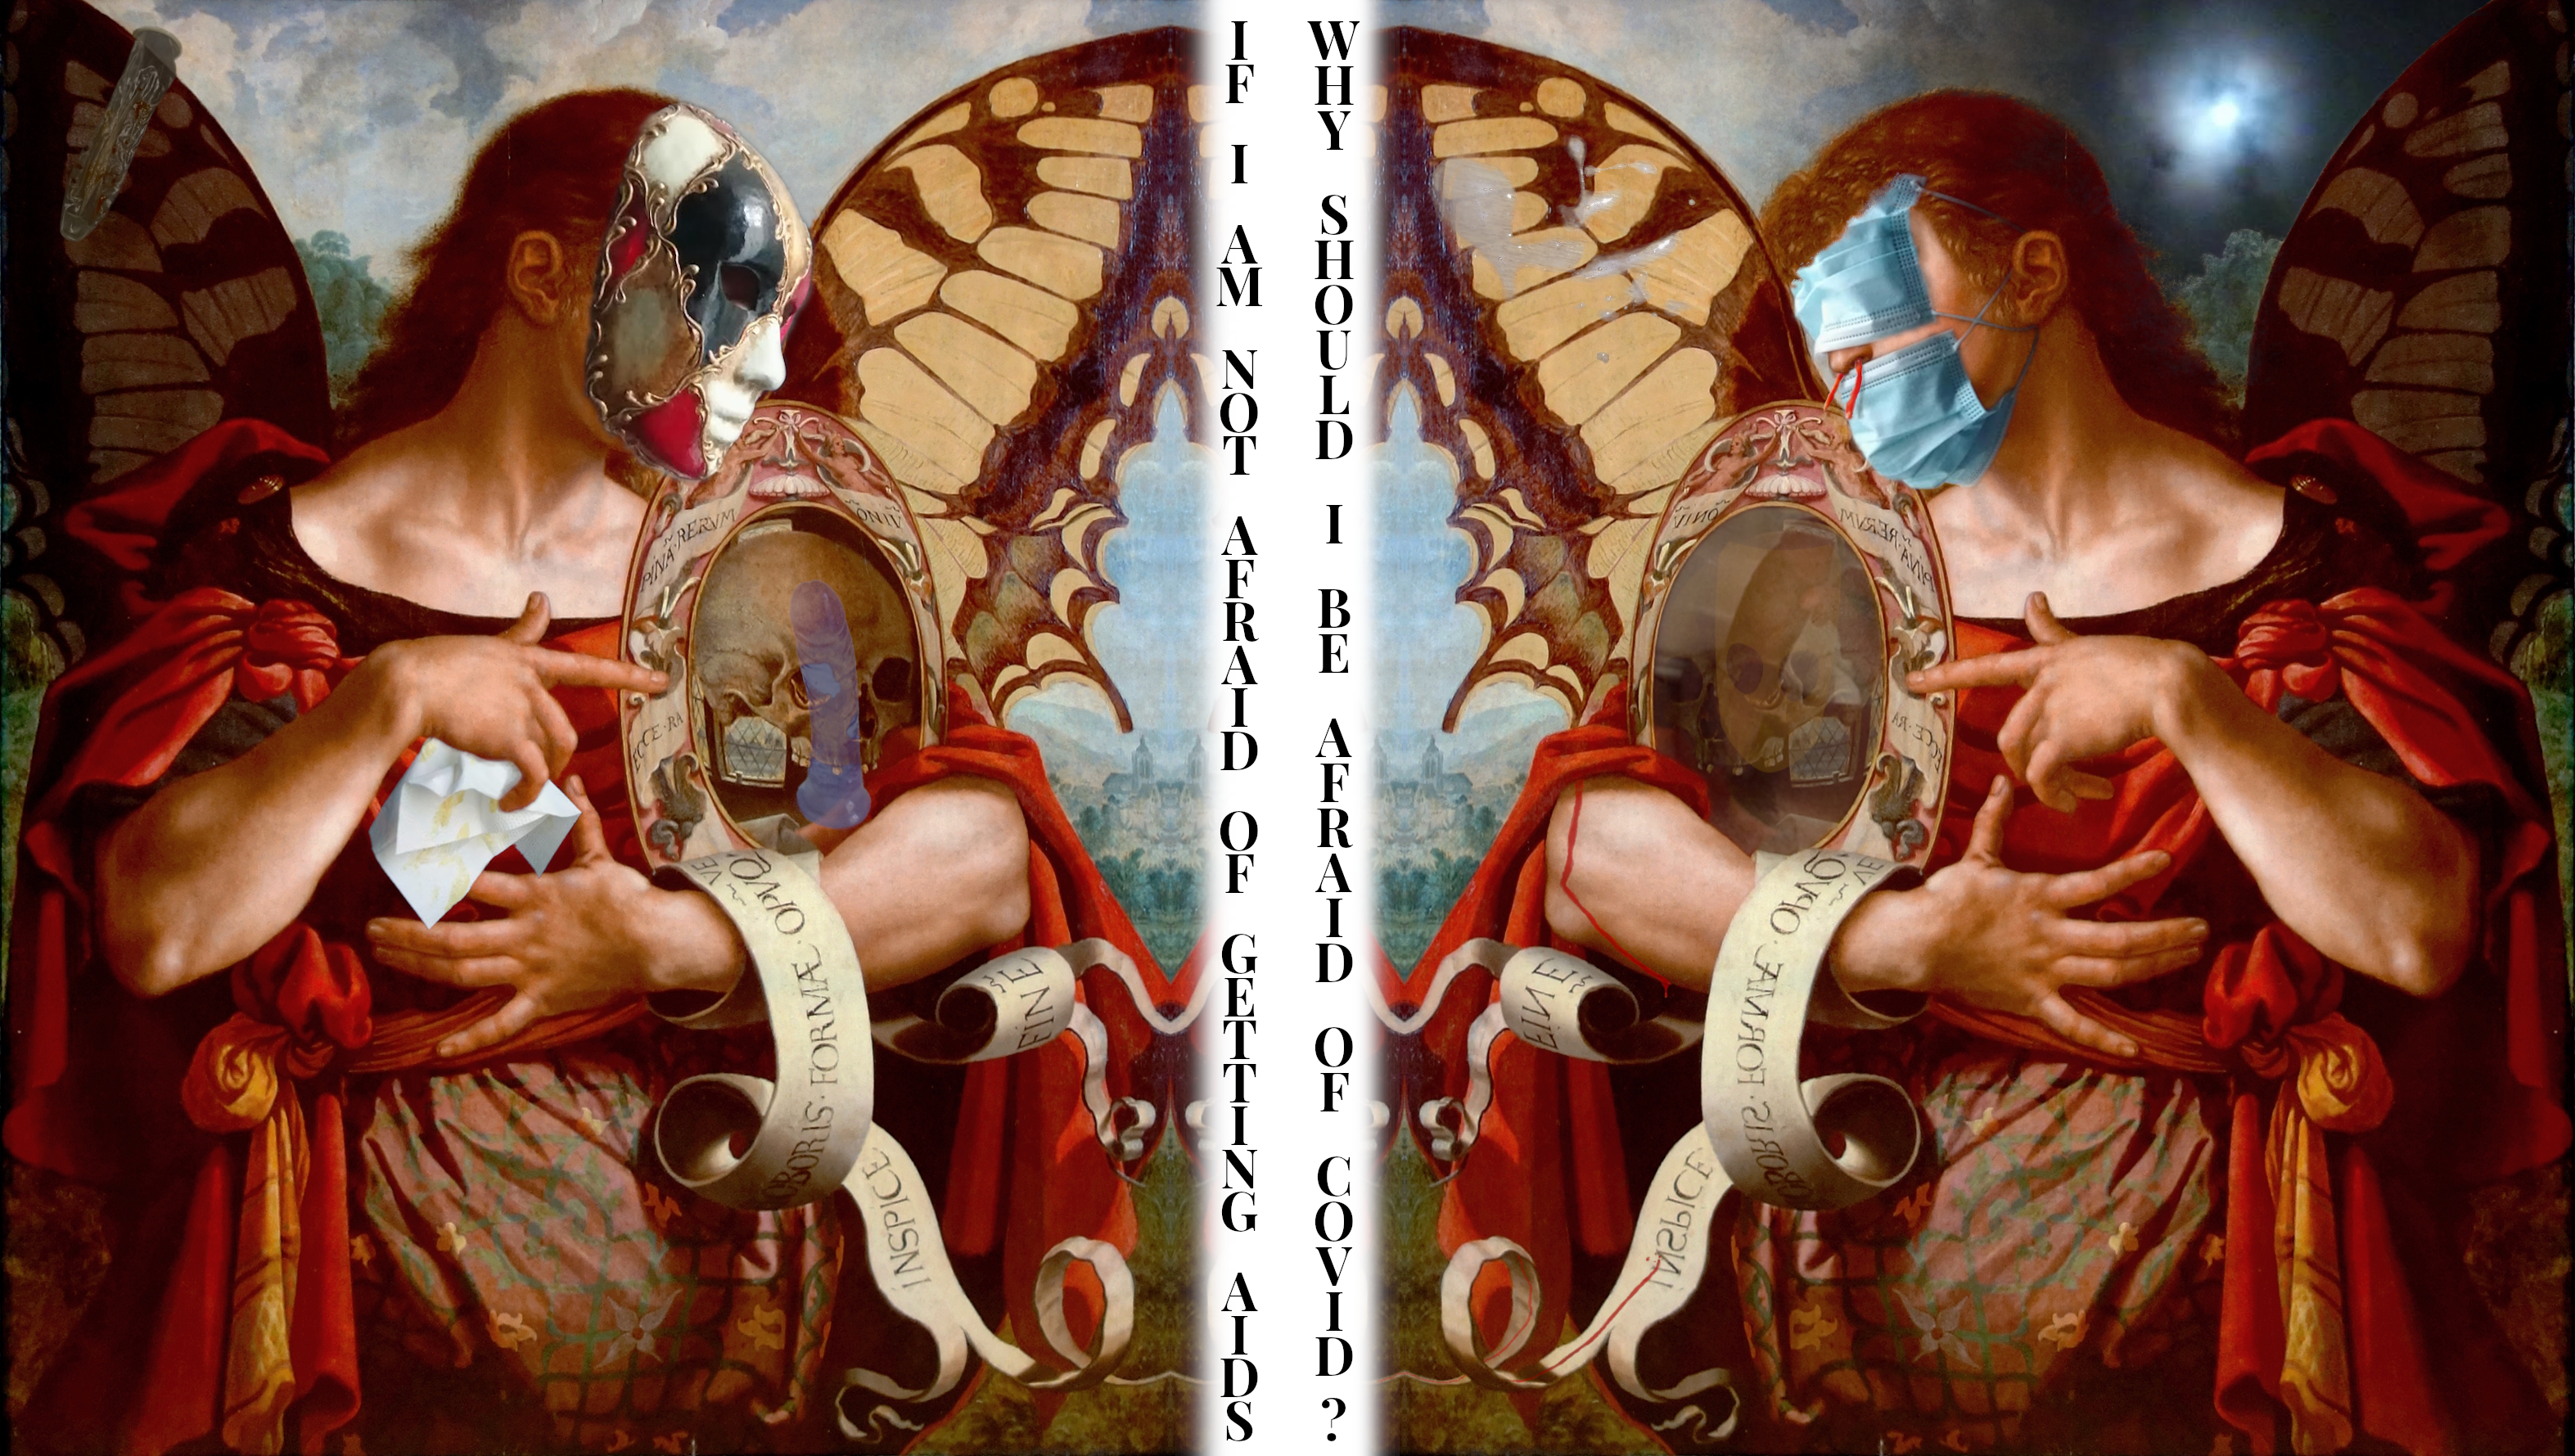 This image uses an almost biblical image as a base, michael diangelo figures facing each other. in the centre text writes 'if I am not afraid of AIDs, why should I be afraid of Covid?' The figures on either side have their faces replaced with a procelain mask on one side and on the other, two surgical masks. Hidden collaged aspects are found throughout the peice, an image of a skull, the shape of a dildo, a used tissue in the hand of one of the figures and it is very easy to miss the depth and detail